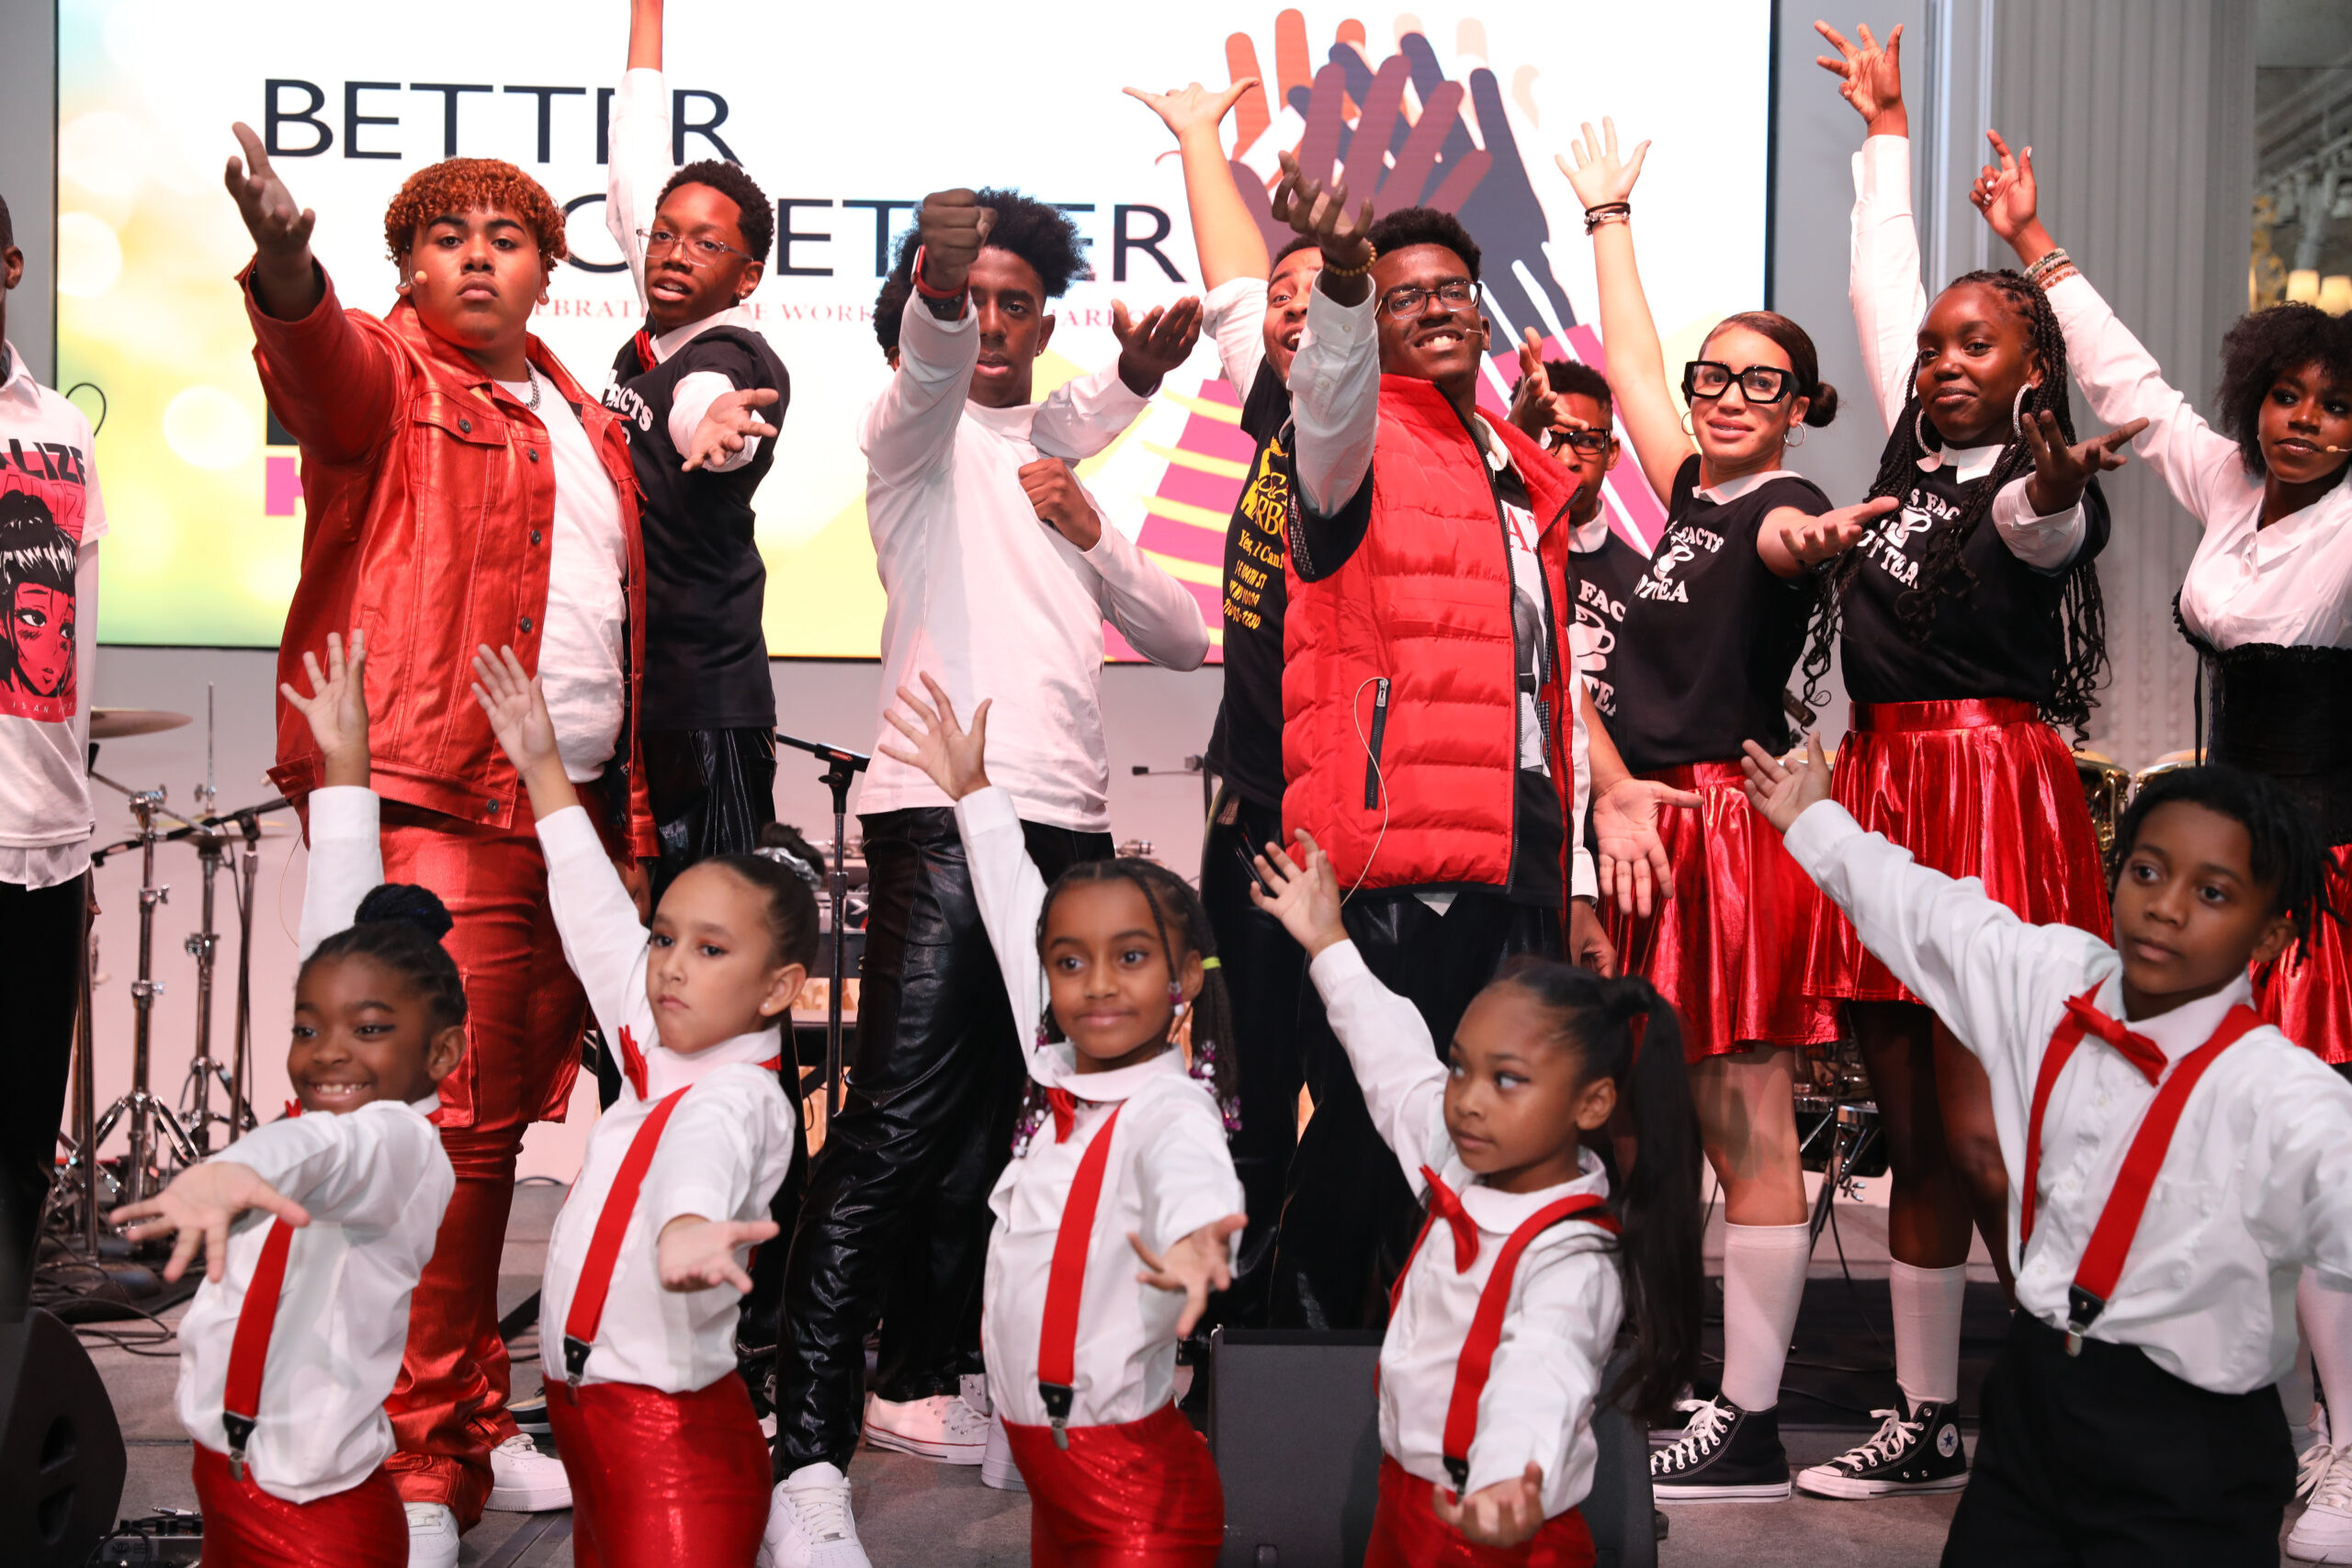 SCAN-Harbor Performing Arts Academy youth perform at the Better Together Gala 2022